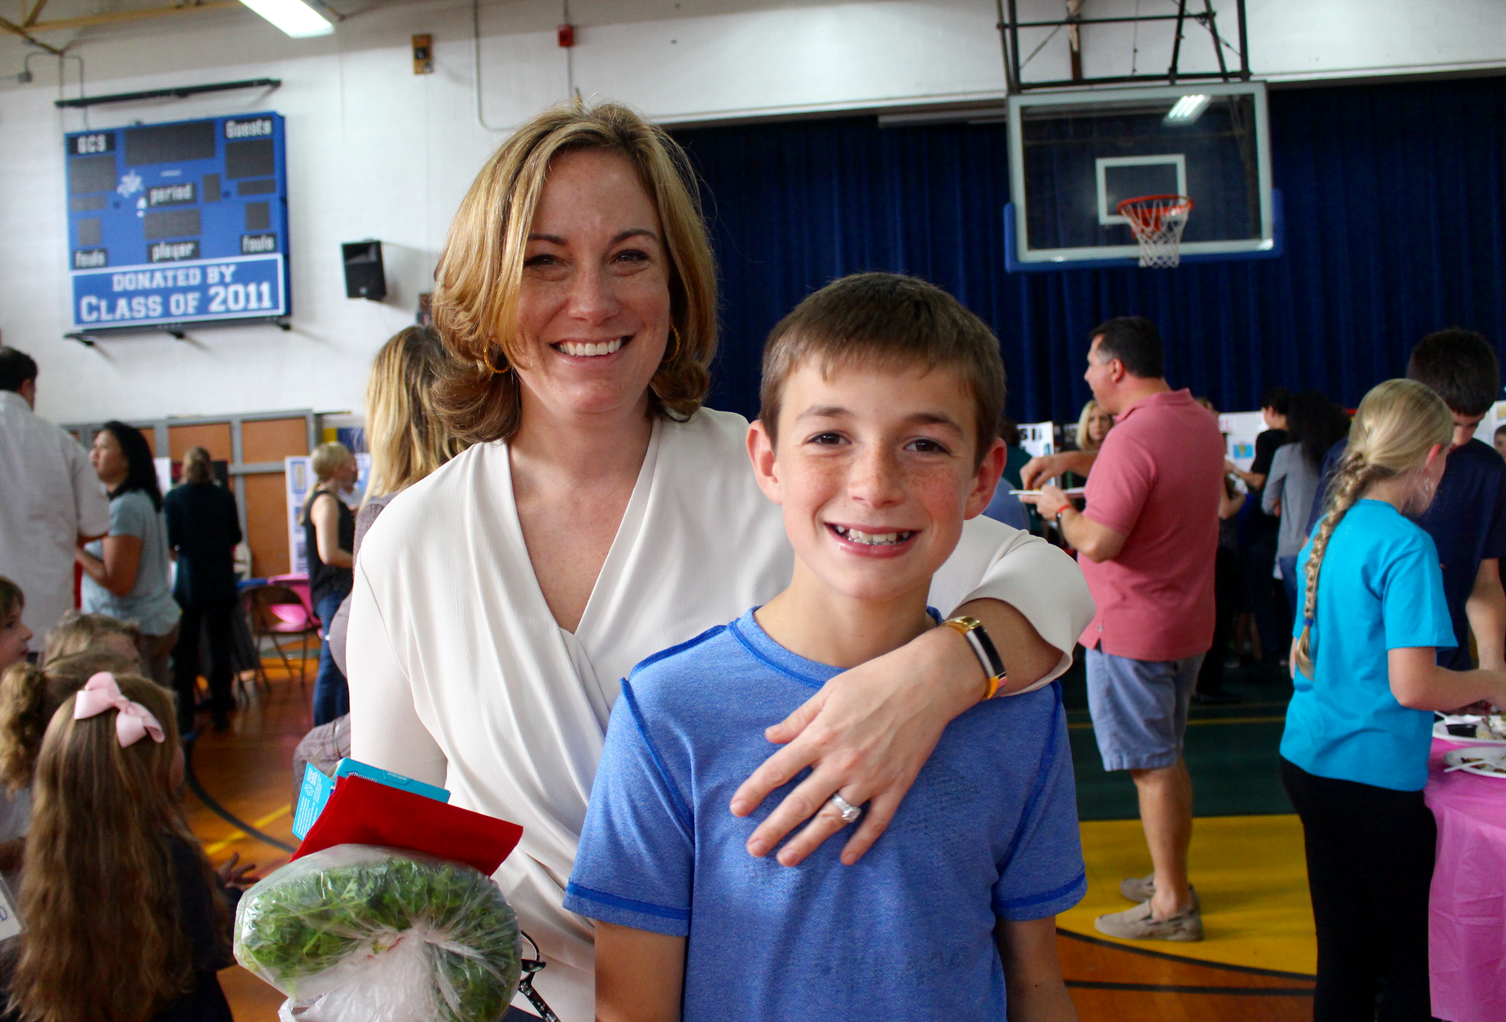 Carolyn Coutant and her son at the Greenwich Catholic School cultural diversity day celebration. Oct 24, 2017 Photo: Leslie Yager